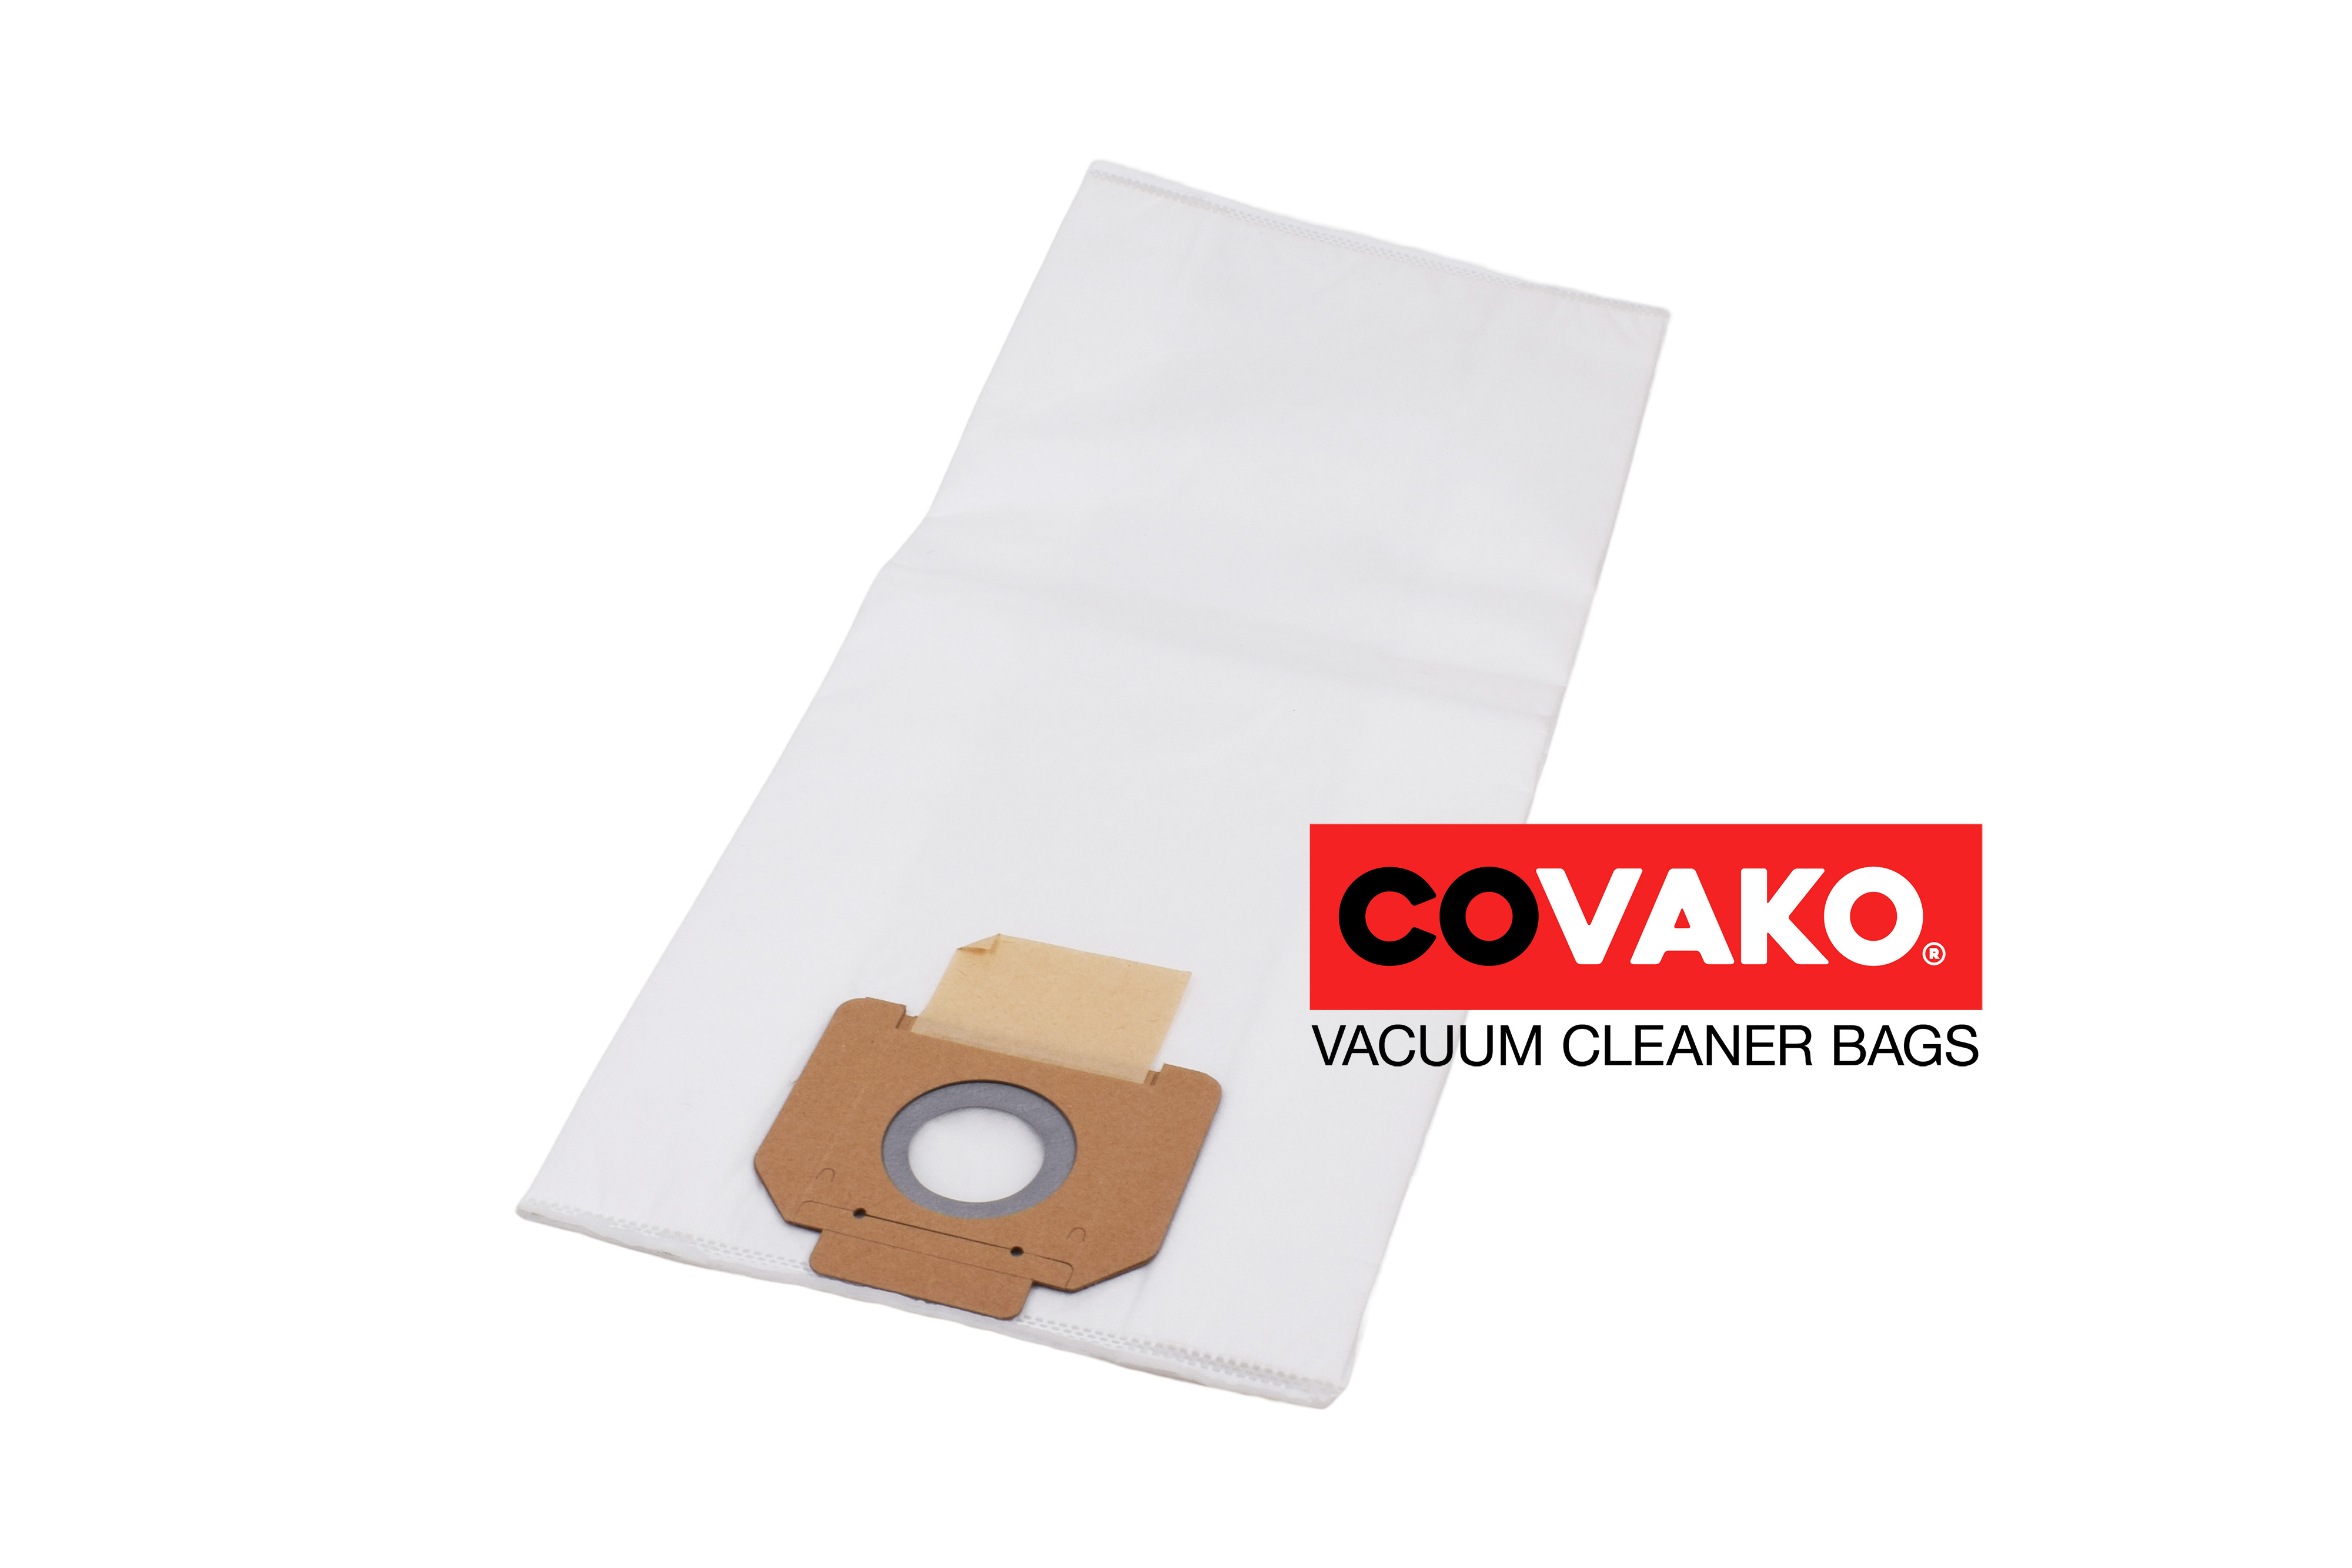 DiBo Windly 515/37 IPC / Synthesis - DiBo vacuum cleaner bags